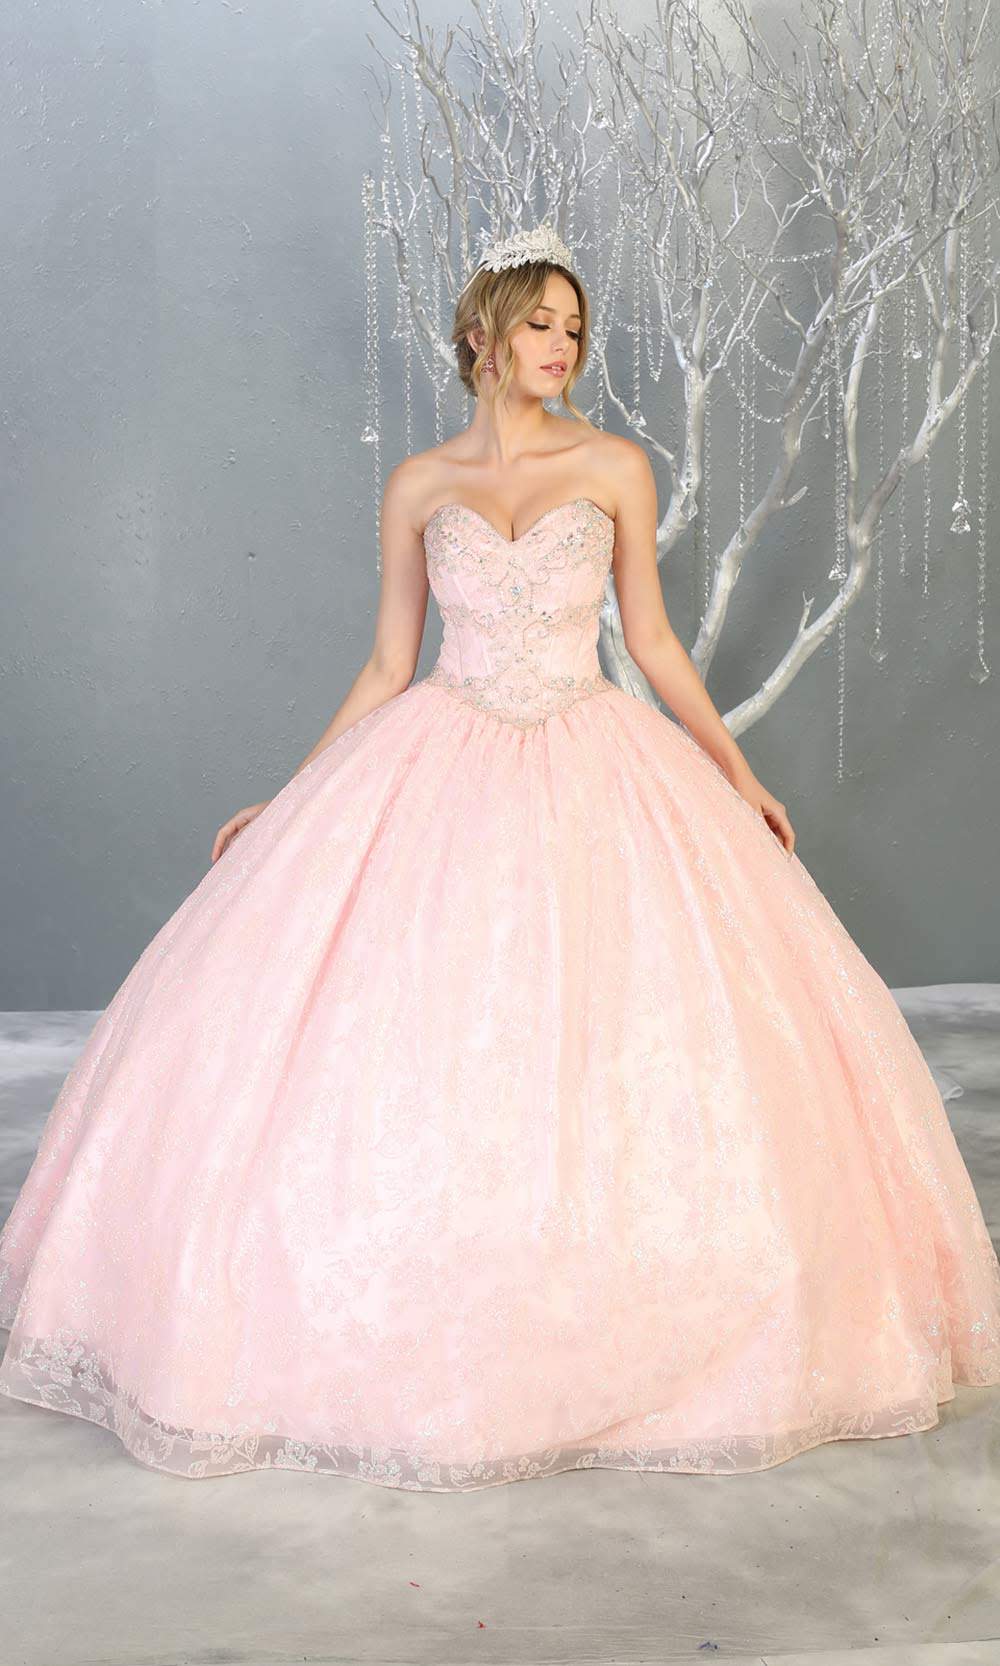 Mayqueen LK144 blush pink quinceanera ball gown w/lace detail and beaded top. This light pink ball gown is perfect for engagement dress, wedding reception, indowestern party gown, sweet 16, debut, sweet 15, sweet 18. Plus sizes available for ballgowns